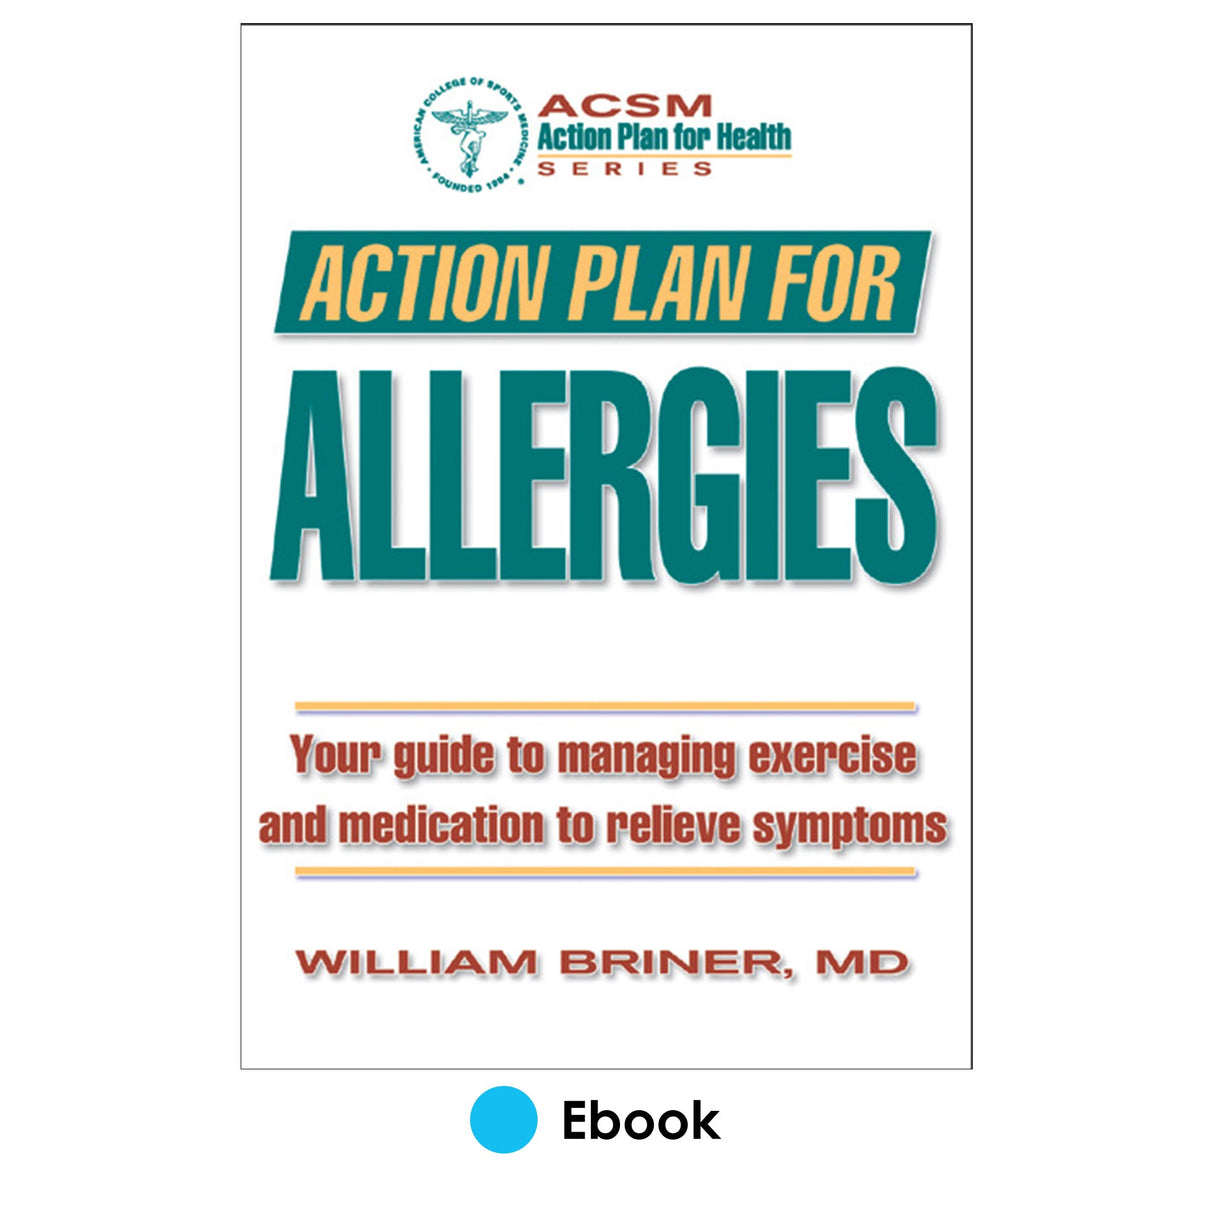 Action Plan for Allergies PDF